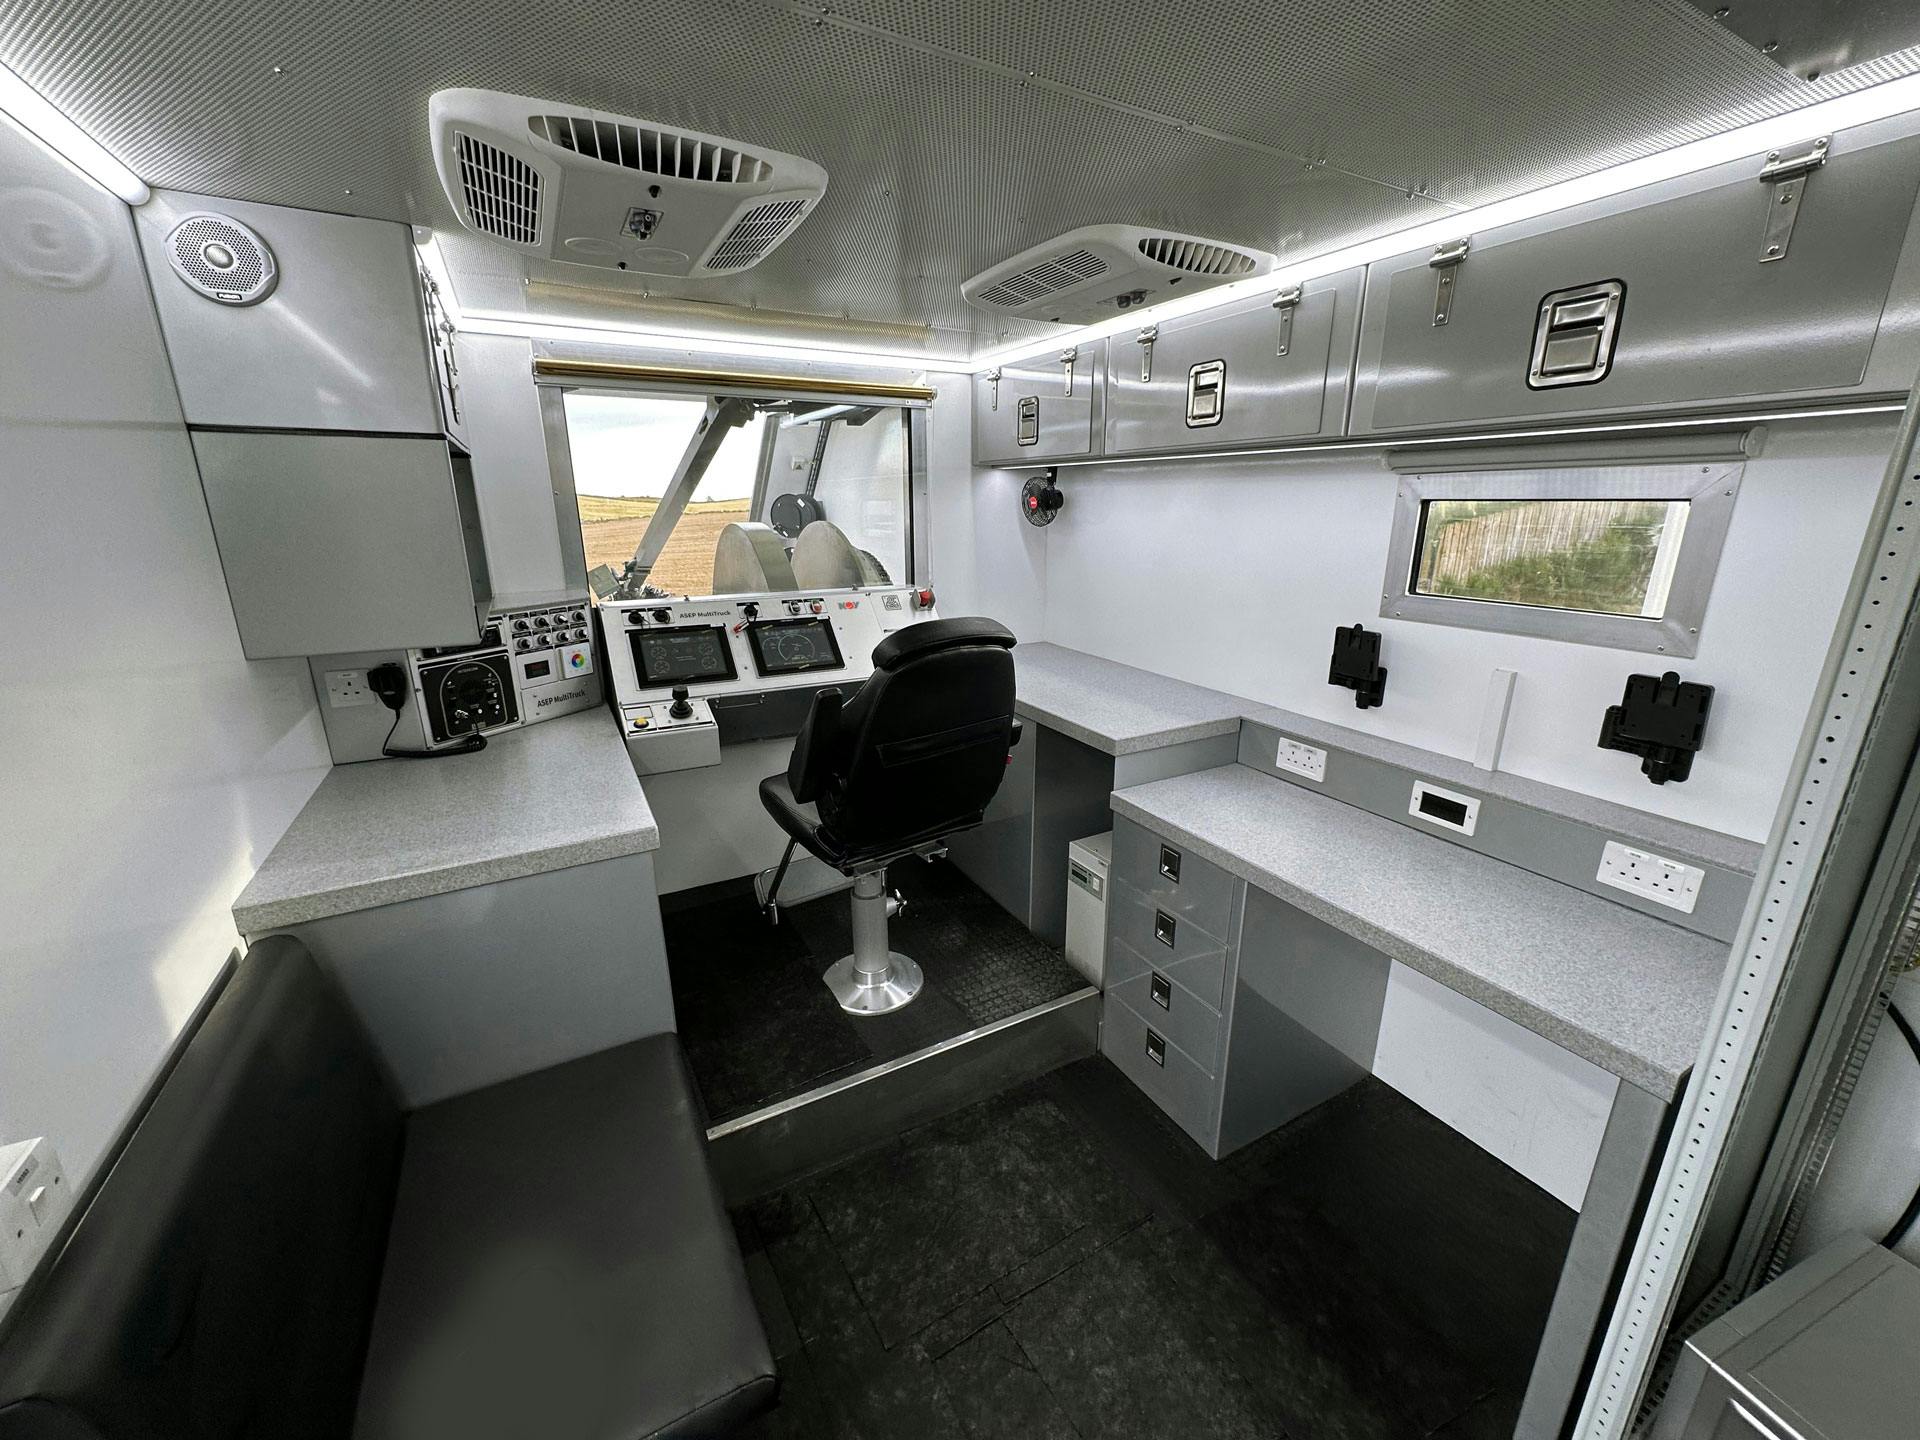 Inside view of a MultiTruck, showing a seat and controls